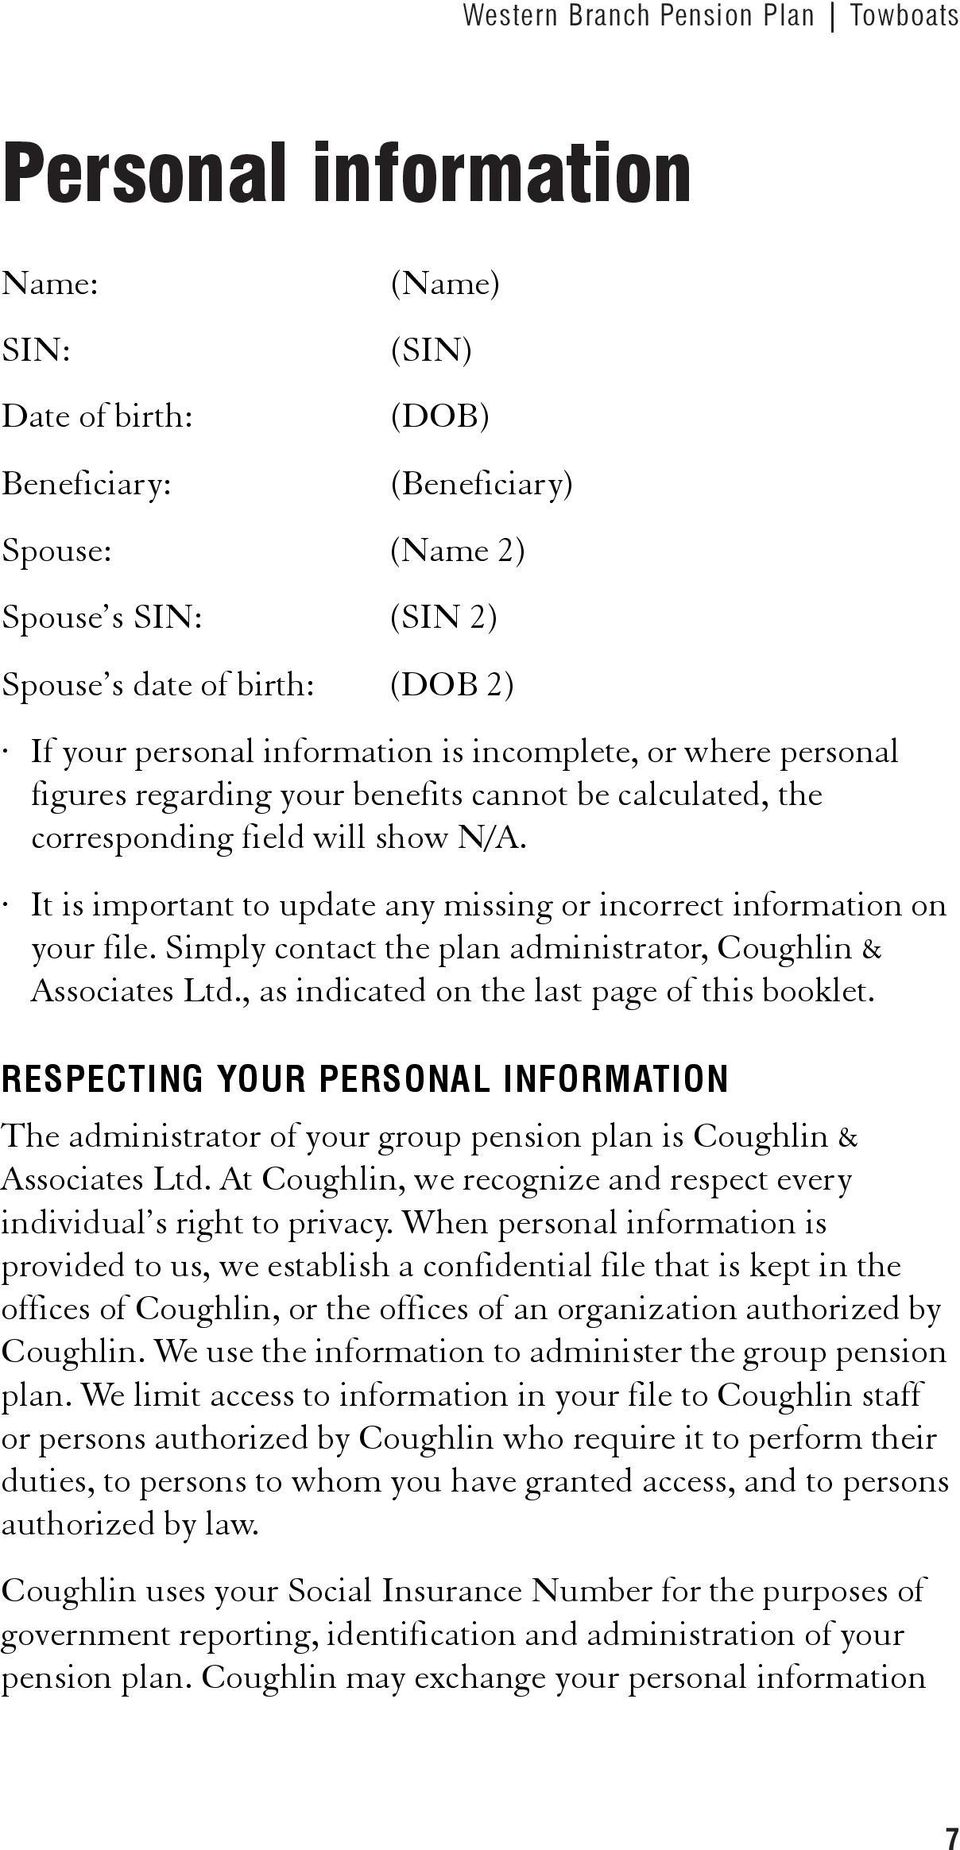 It is important to update any missing or incorrect information on your file. Simply contact the plan administrator, Coughlin & Associates Ltd., as indicated on the last page of this booklet.